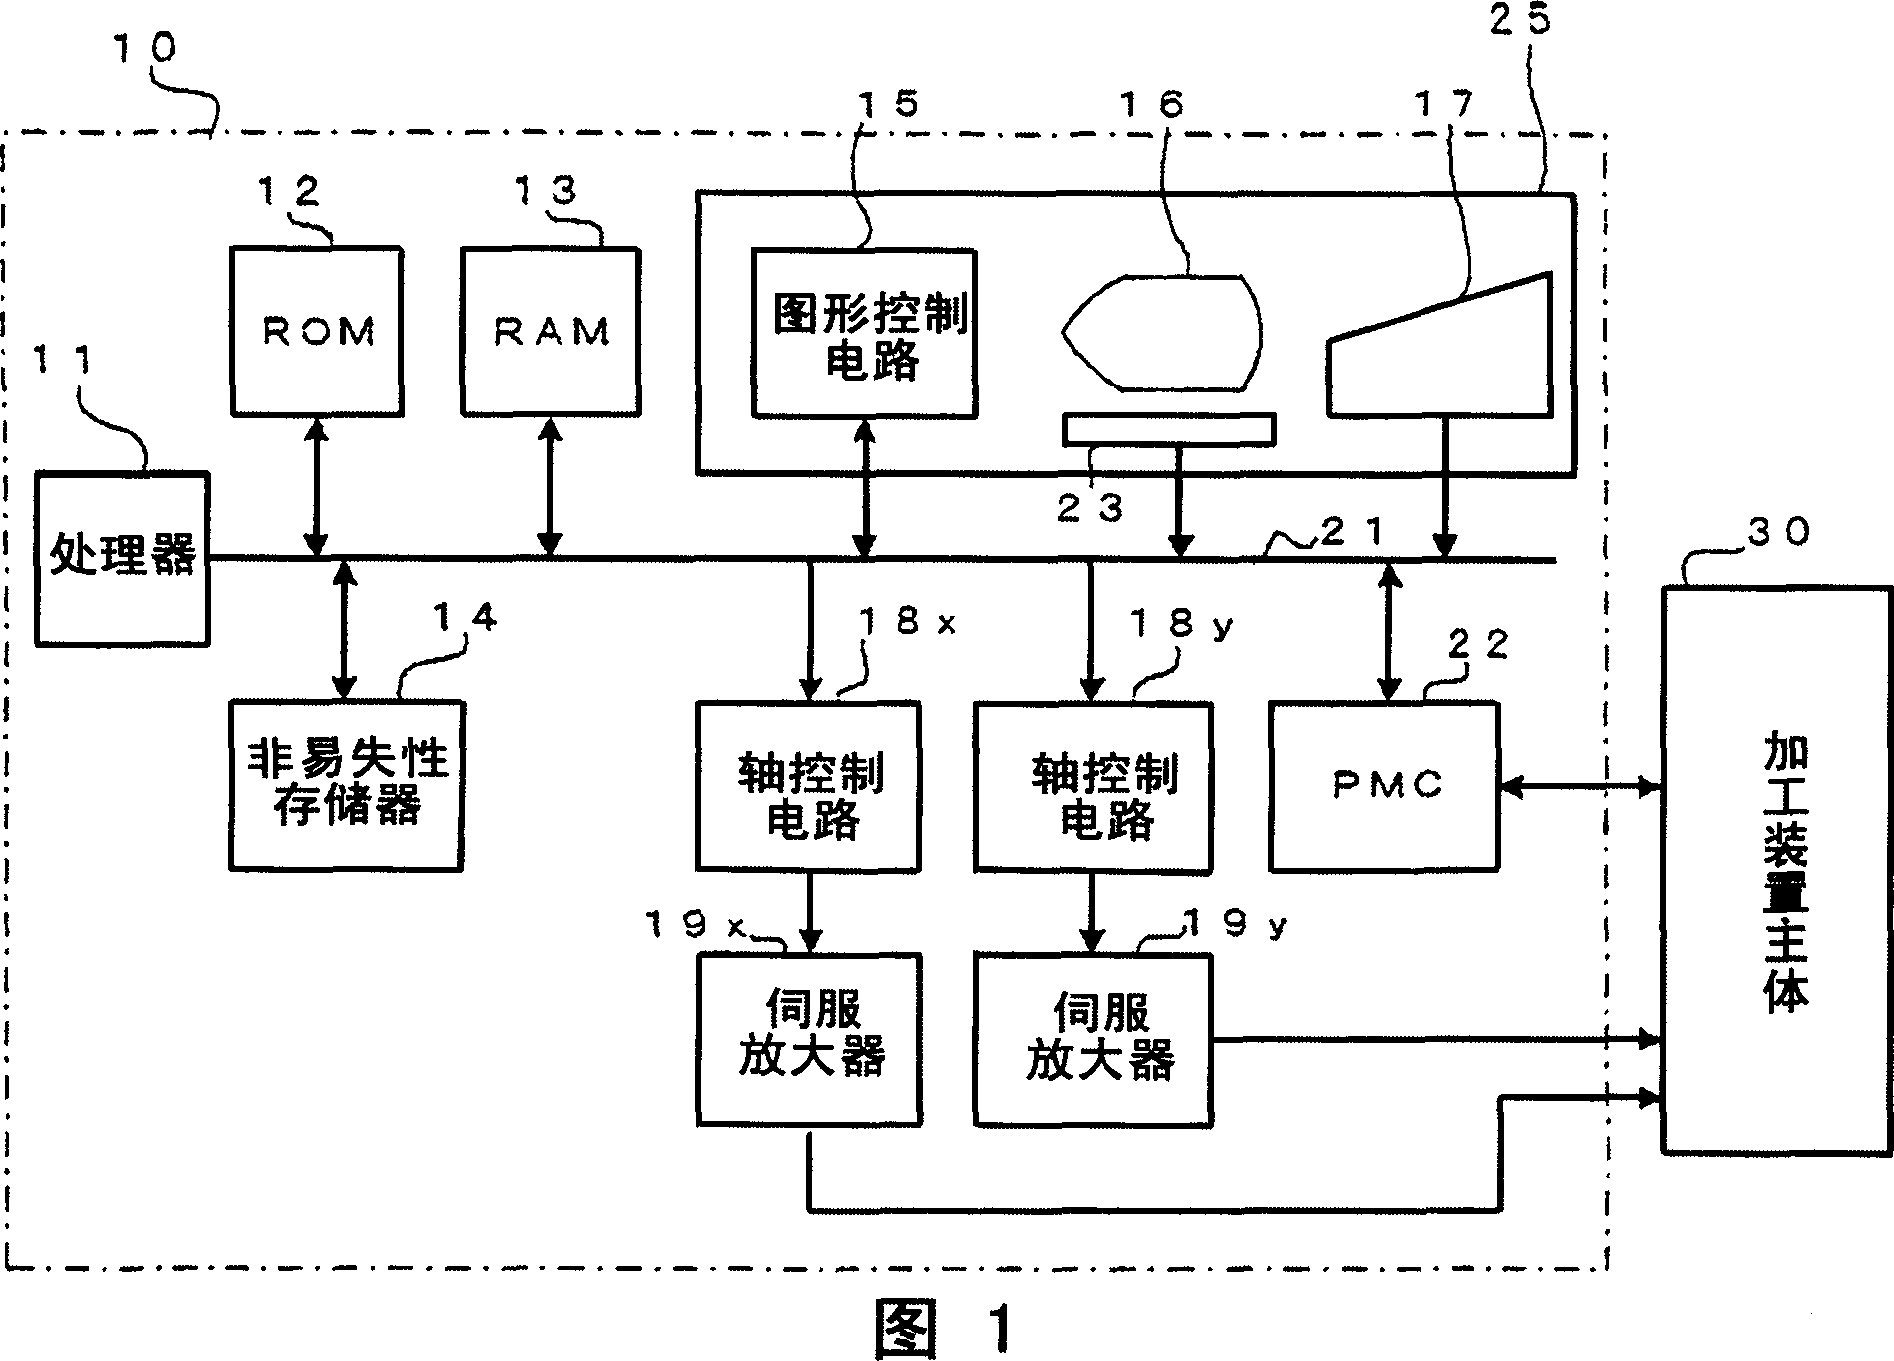 Machining condition setting method for electrical discharge machines